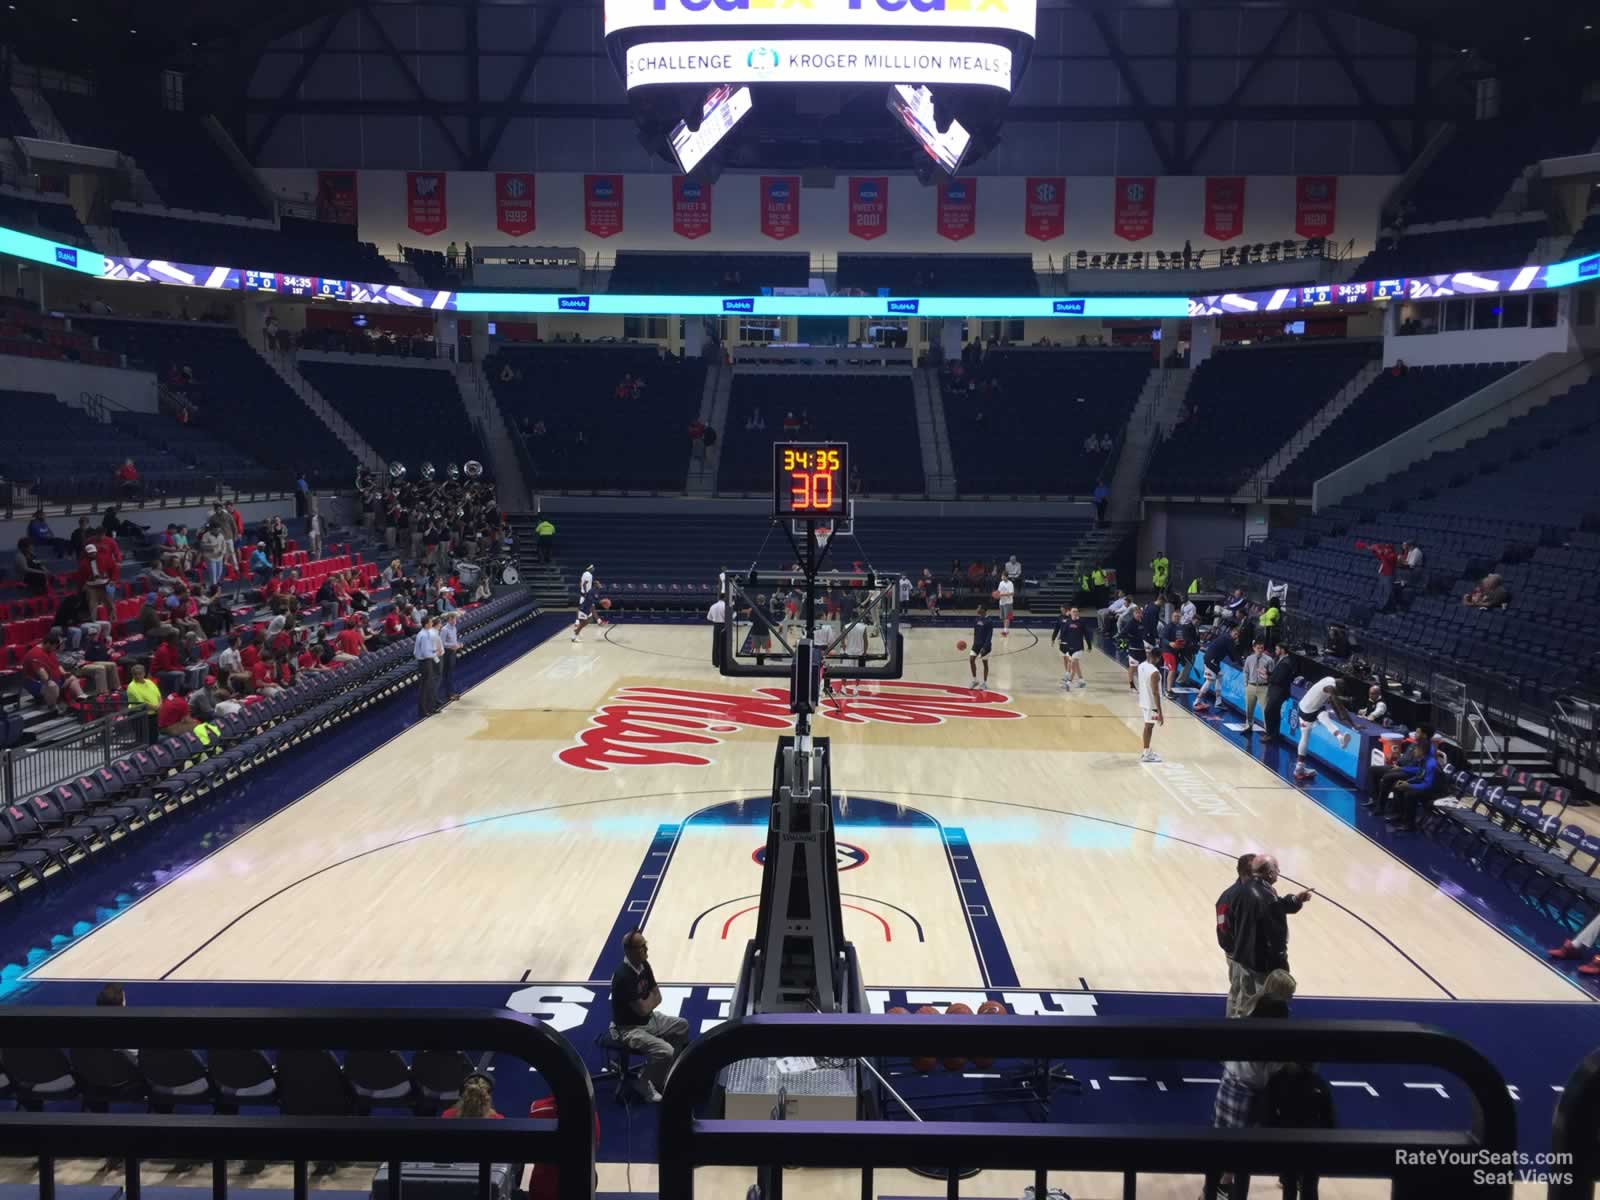 section 117, row 2 seat view  - pavilion at ole miss